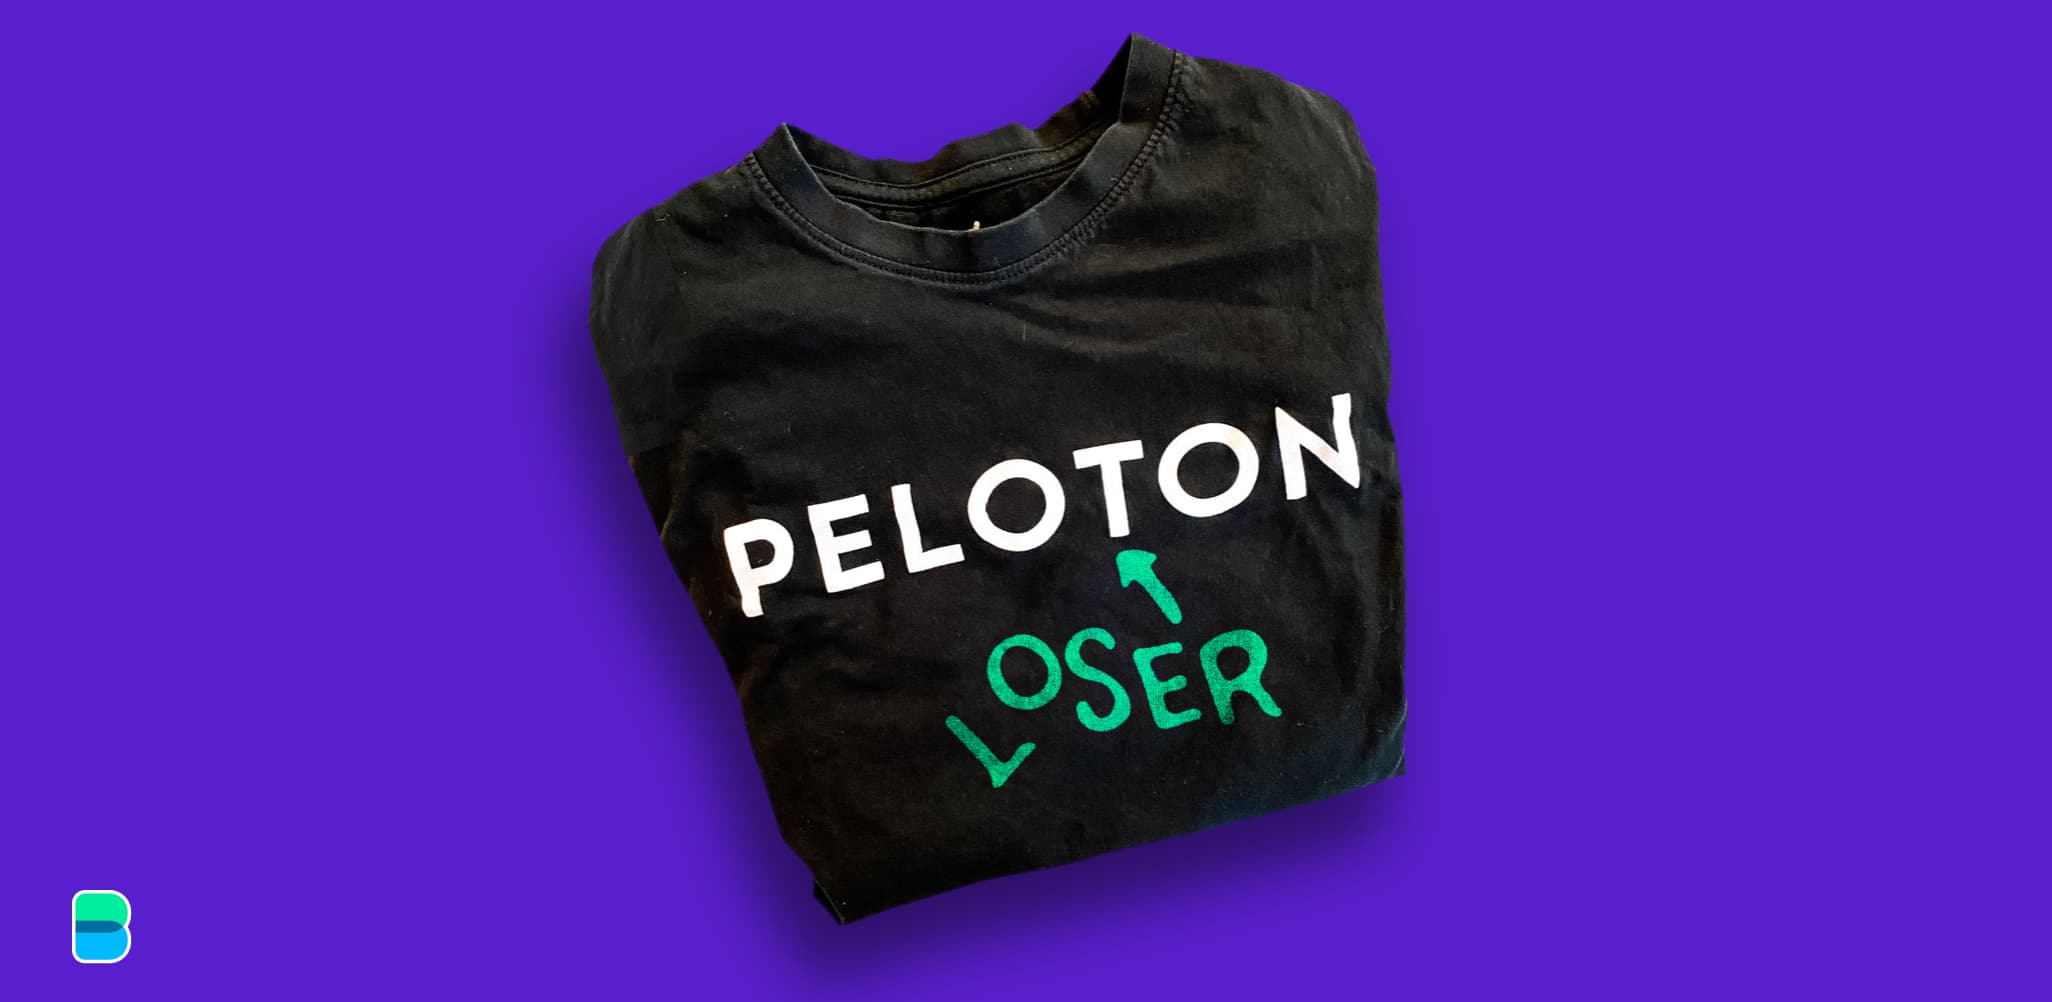 Peloton&rsquo;s being a bit of a sore loser